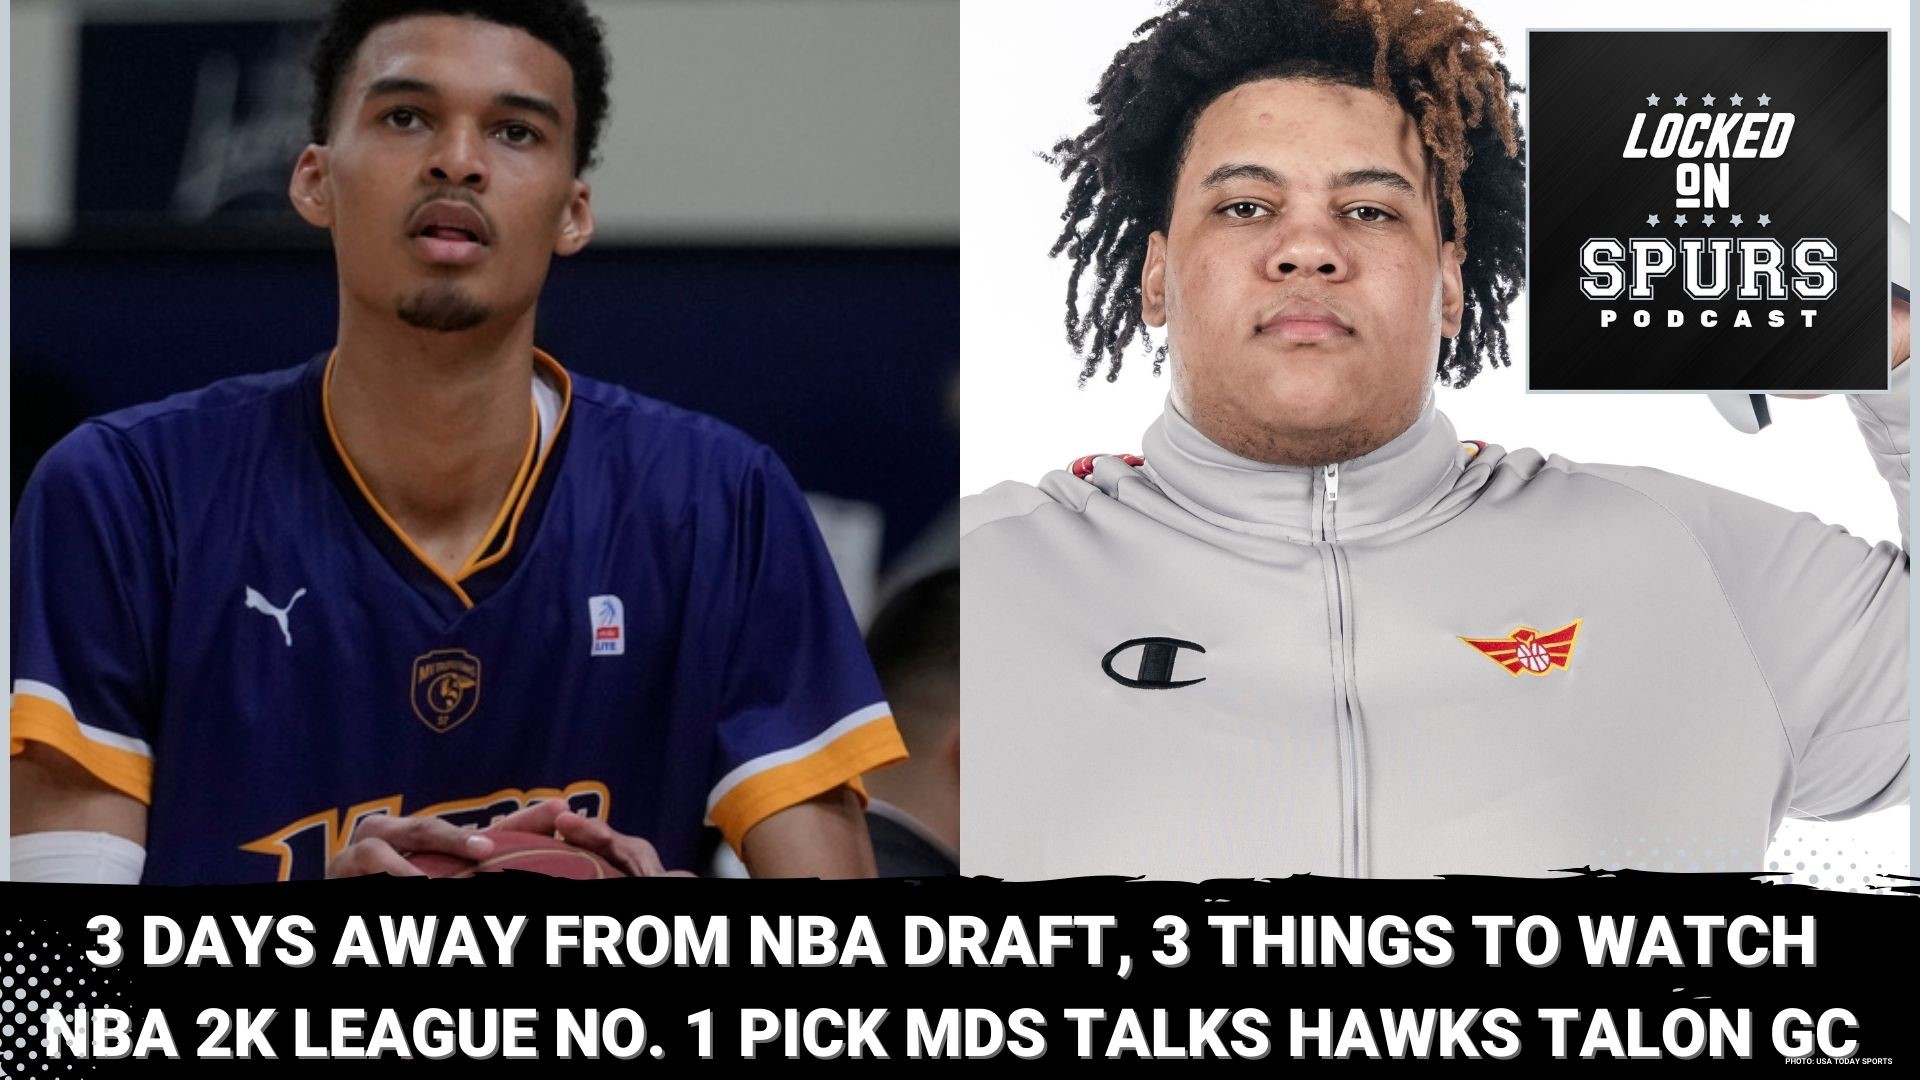 The NBA Draft is three days away and here are three things to watch for.